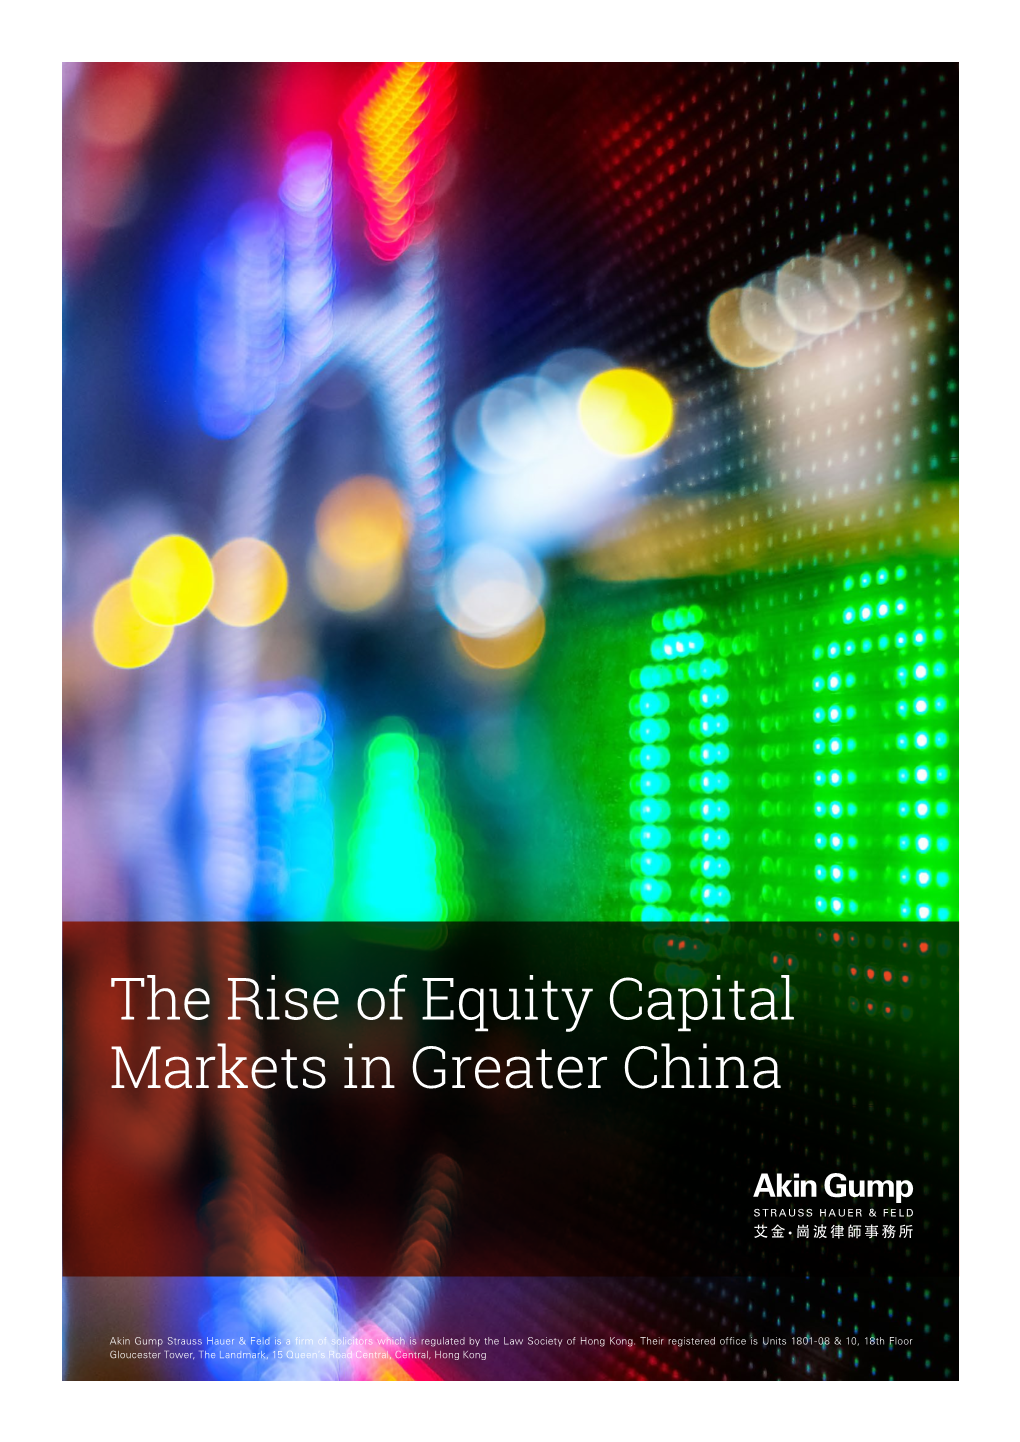 The Rise of Equity Capital Markets in Greater China